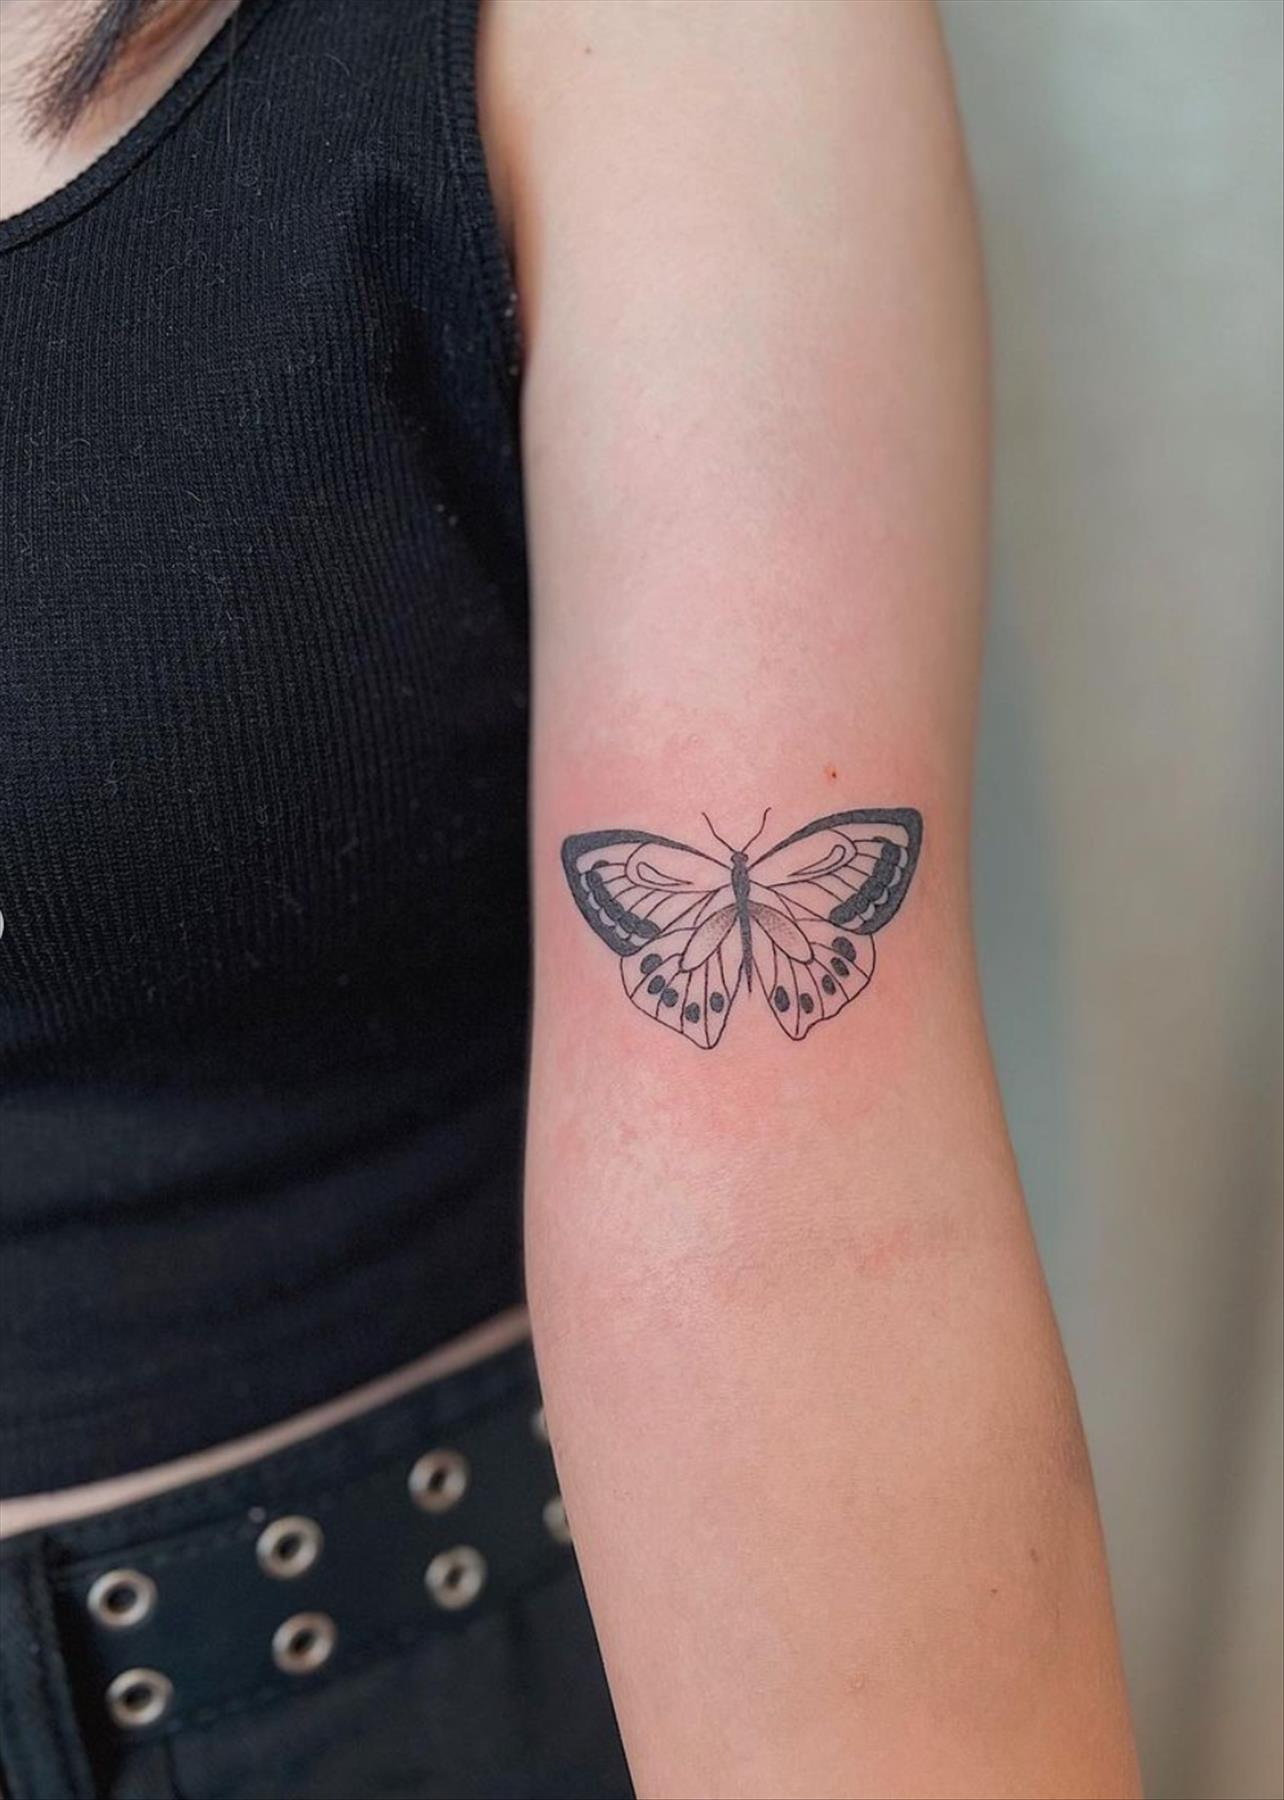 Butterfly tattoo design: Chic spring tattoo pattern for women